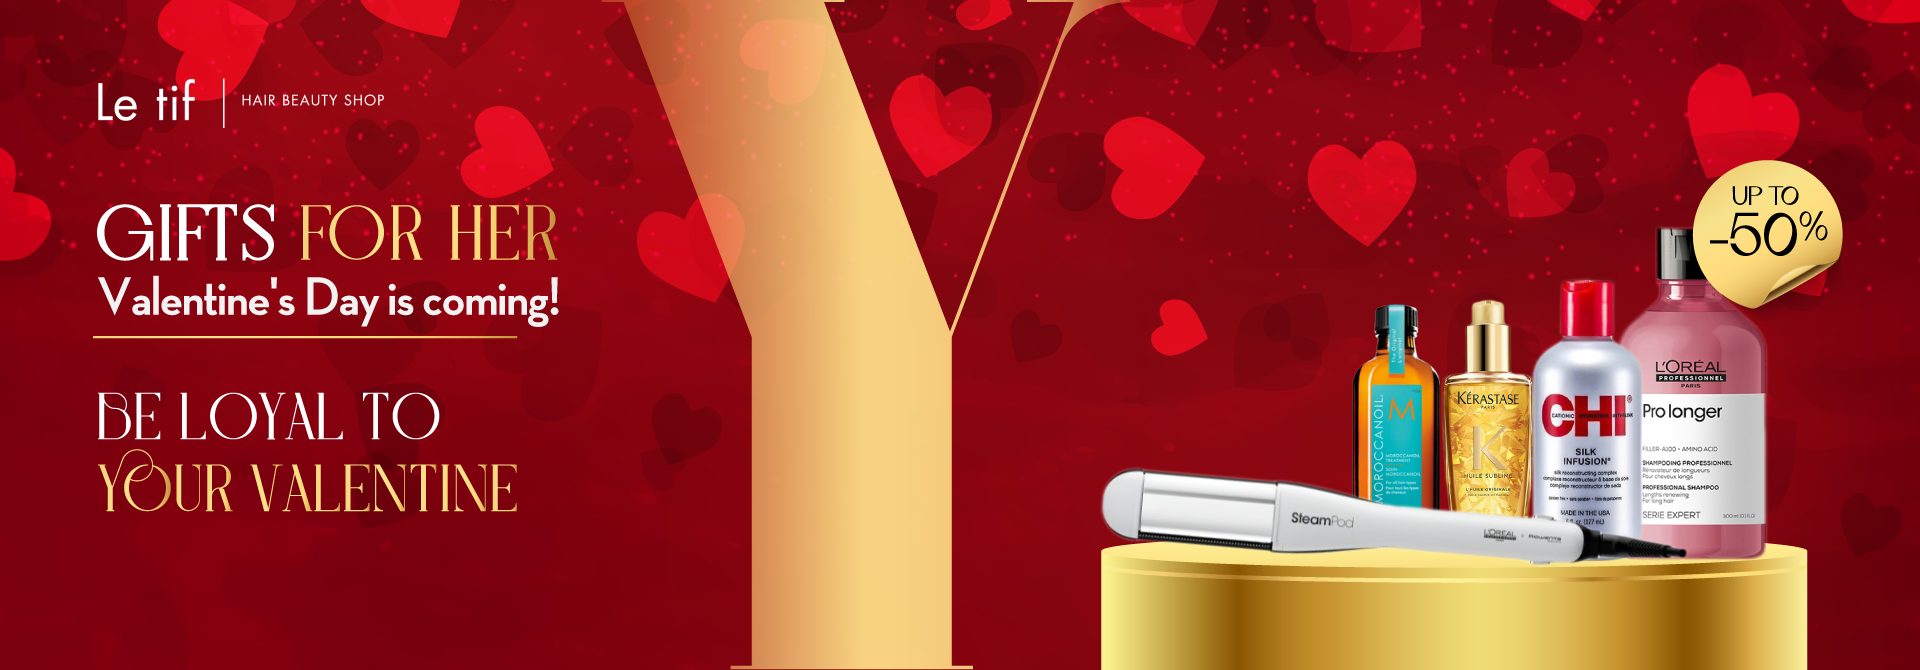 valentine's day banner for her brand page